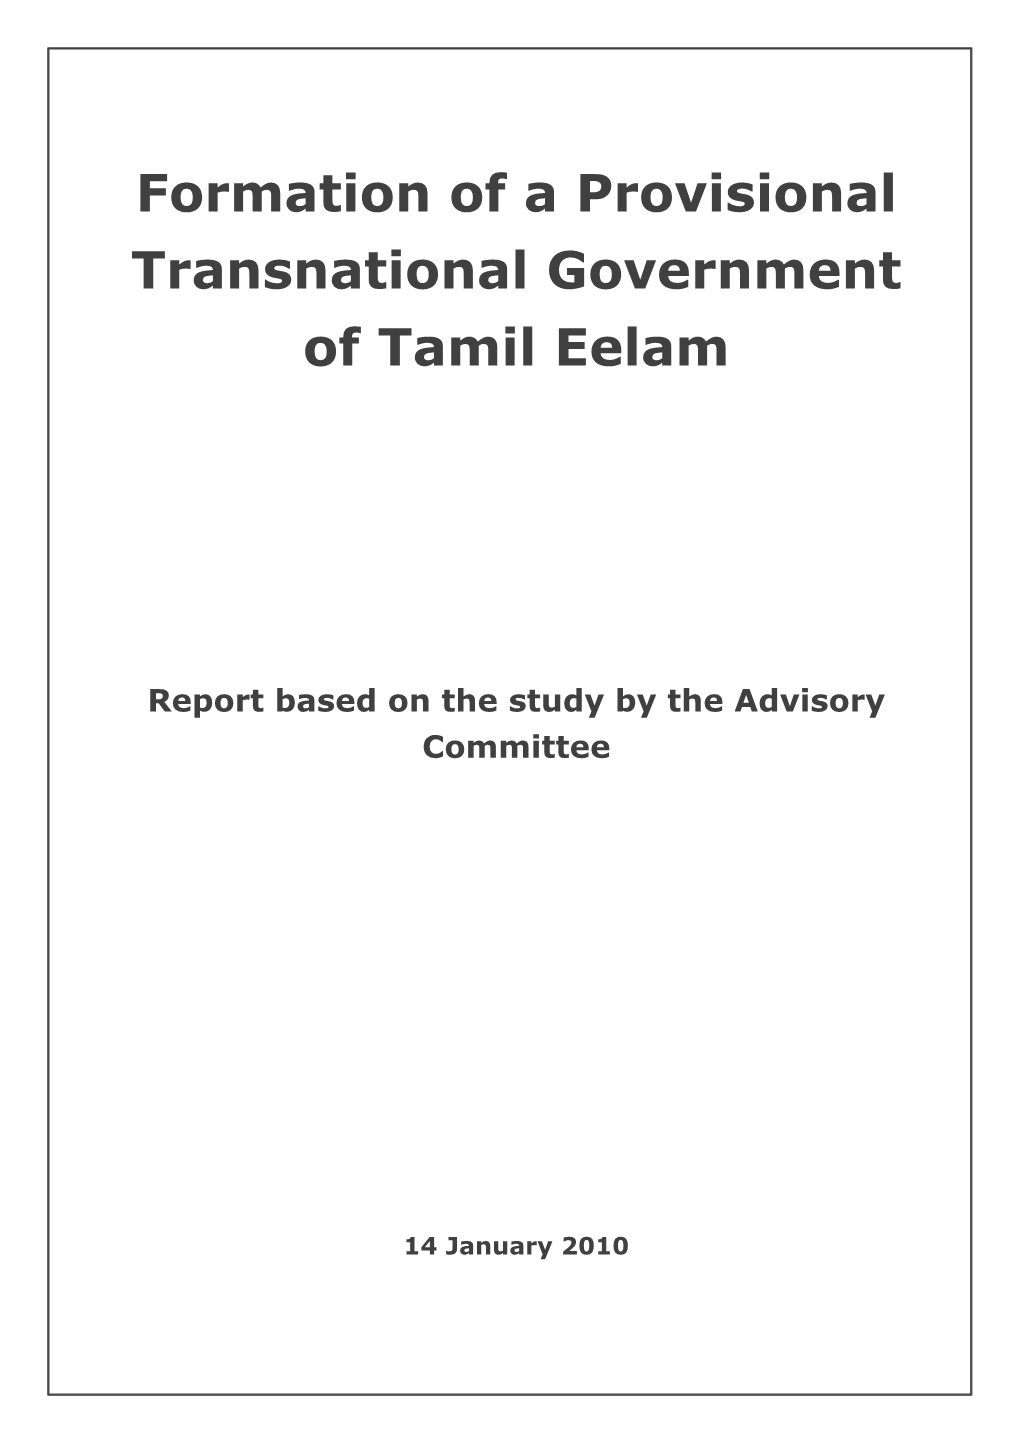 Formation of a Provisional Transnational Government of Tamil Eelam